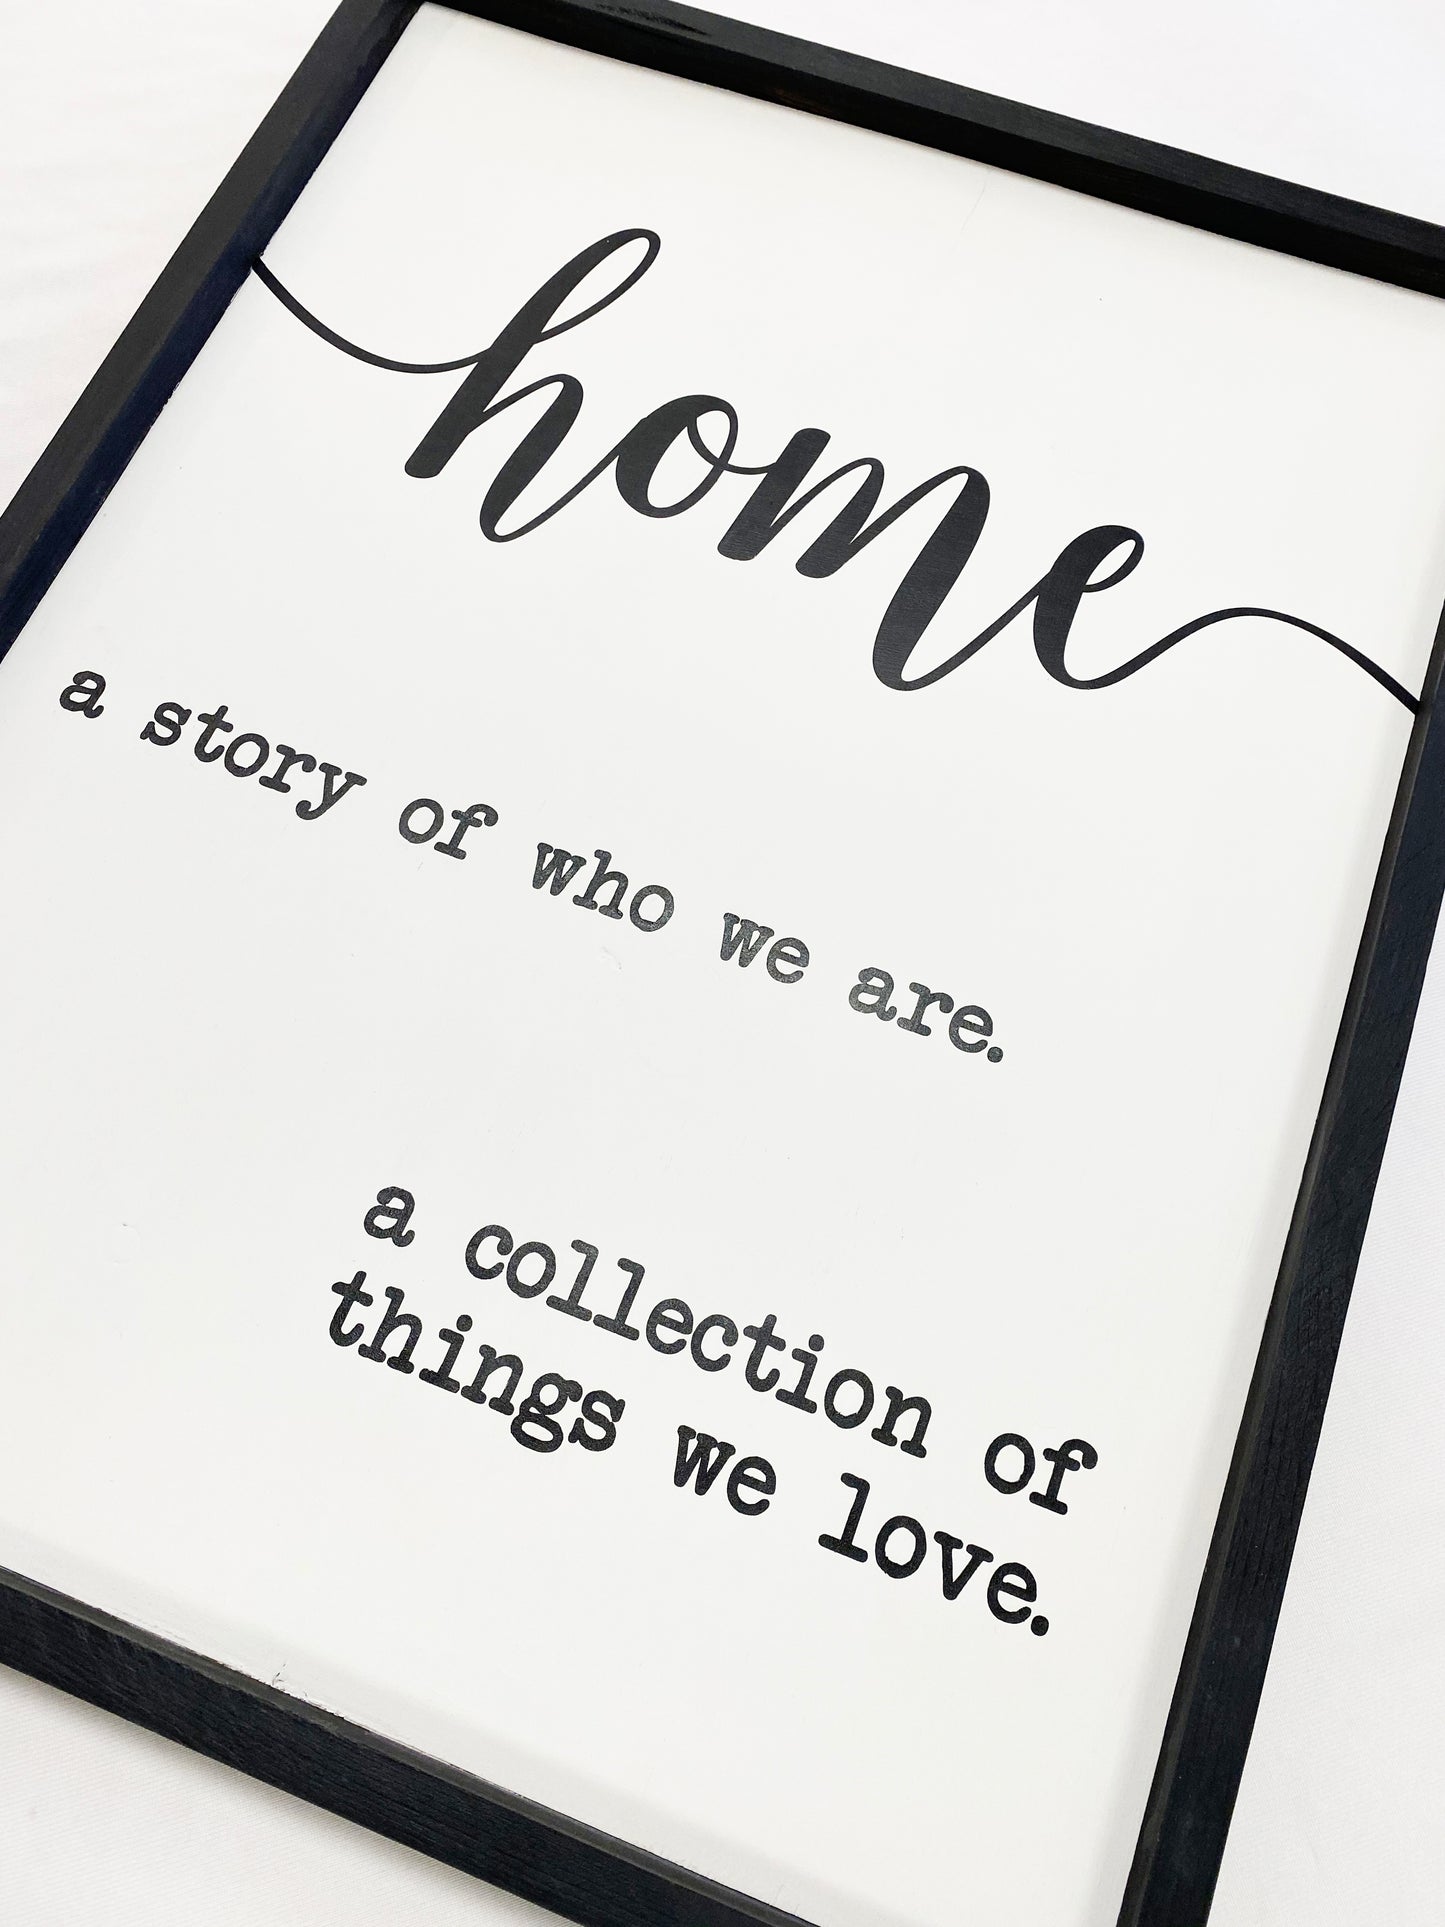 Home A Story Of Who We Are Sign